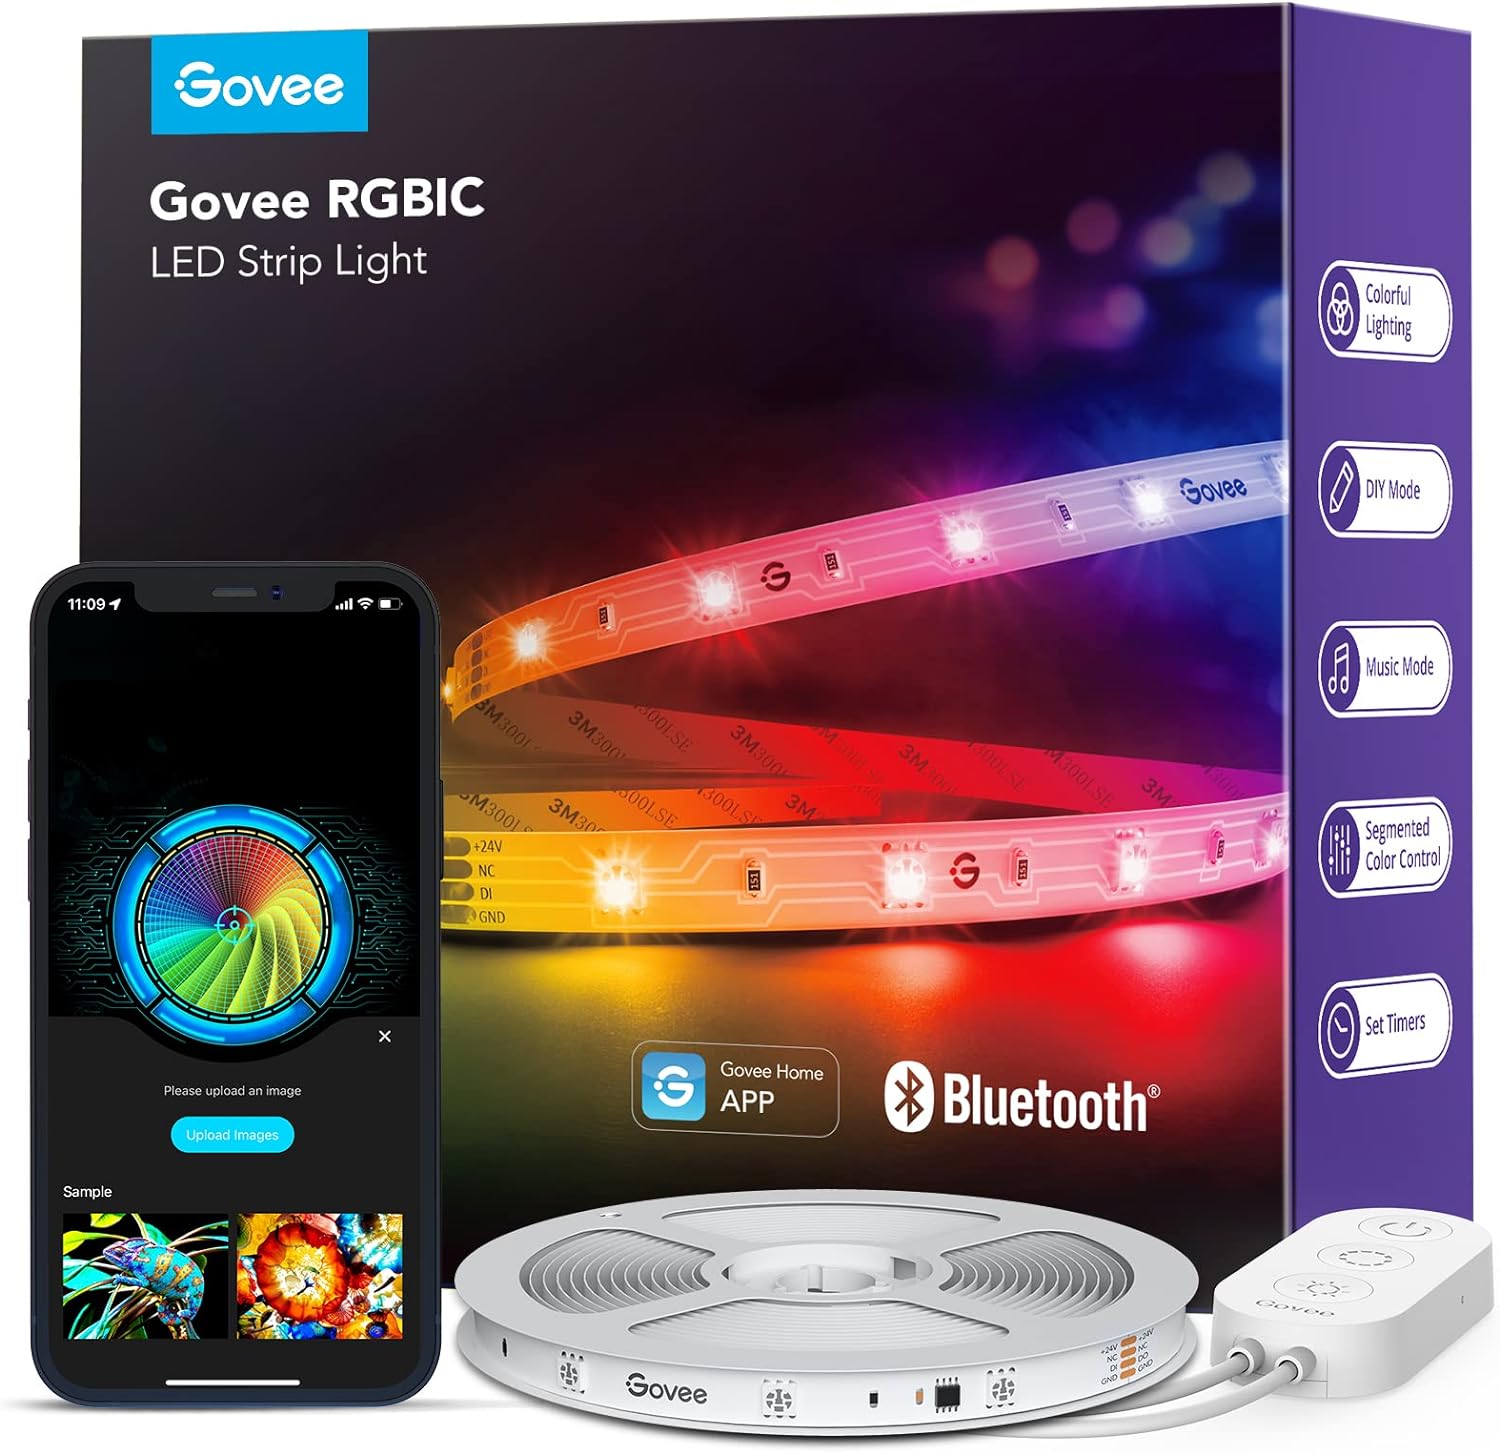 Govee RGBIC LED Strip Lights, Smart LED Lights for Bedroom, Bluetooth LED lights APP Control, DIY Multiple Colors on One Line, Color Changing LED Strip Lighting Music Sync, Halloween, New Year, 16.4ft